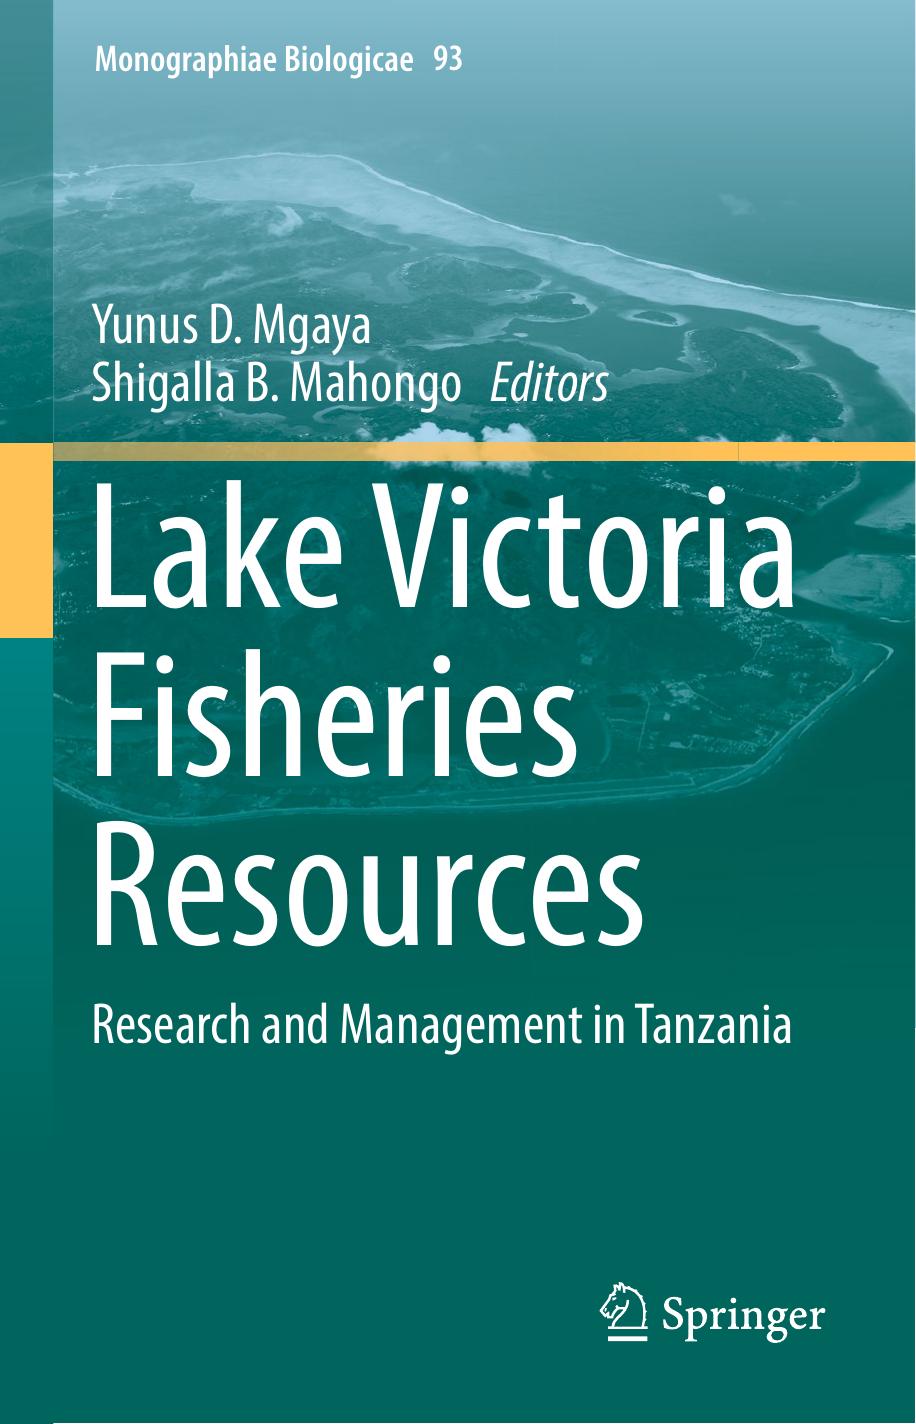 Lake Victoria Fisheries Resources   Research and Management in Tanzania-Springer International Publishing (2017)